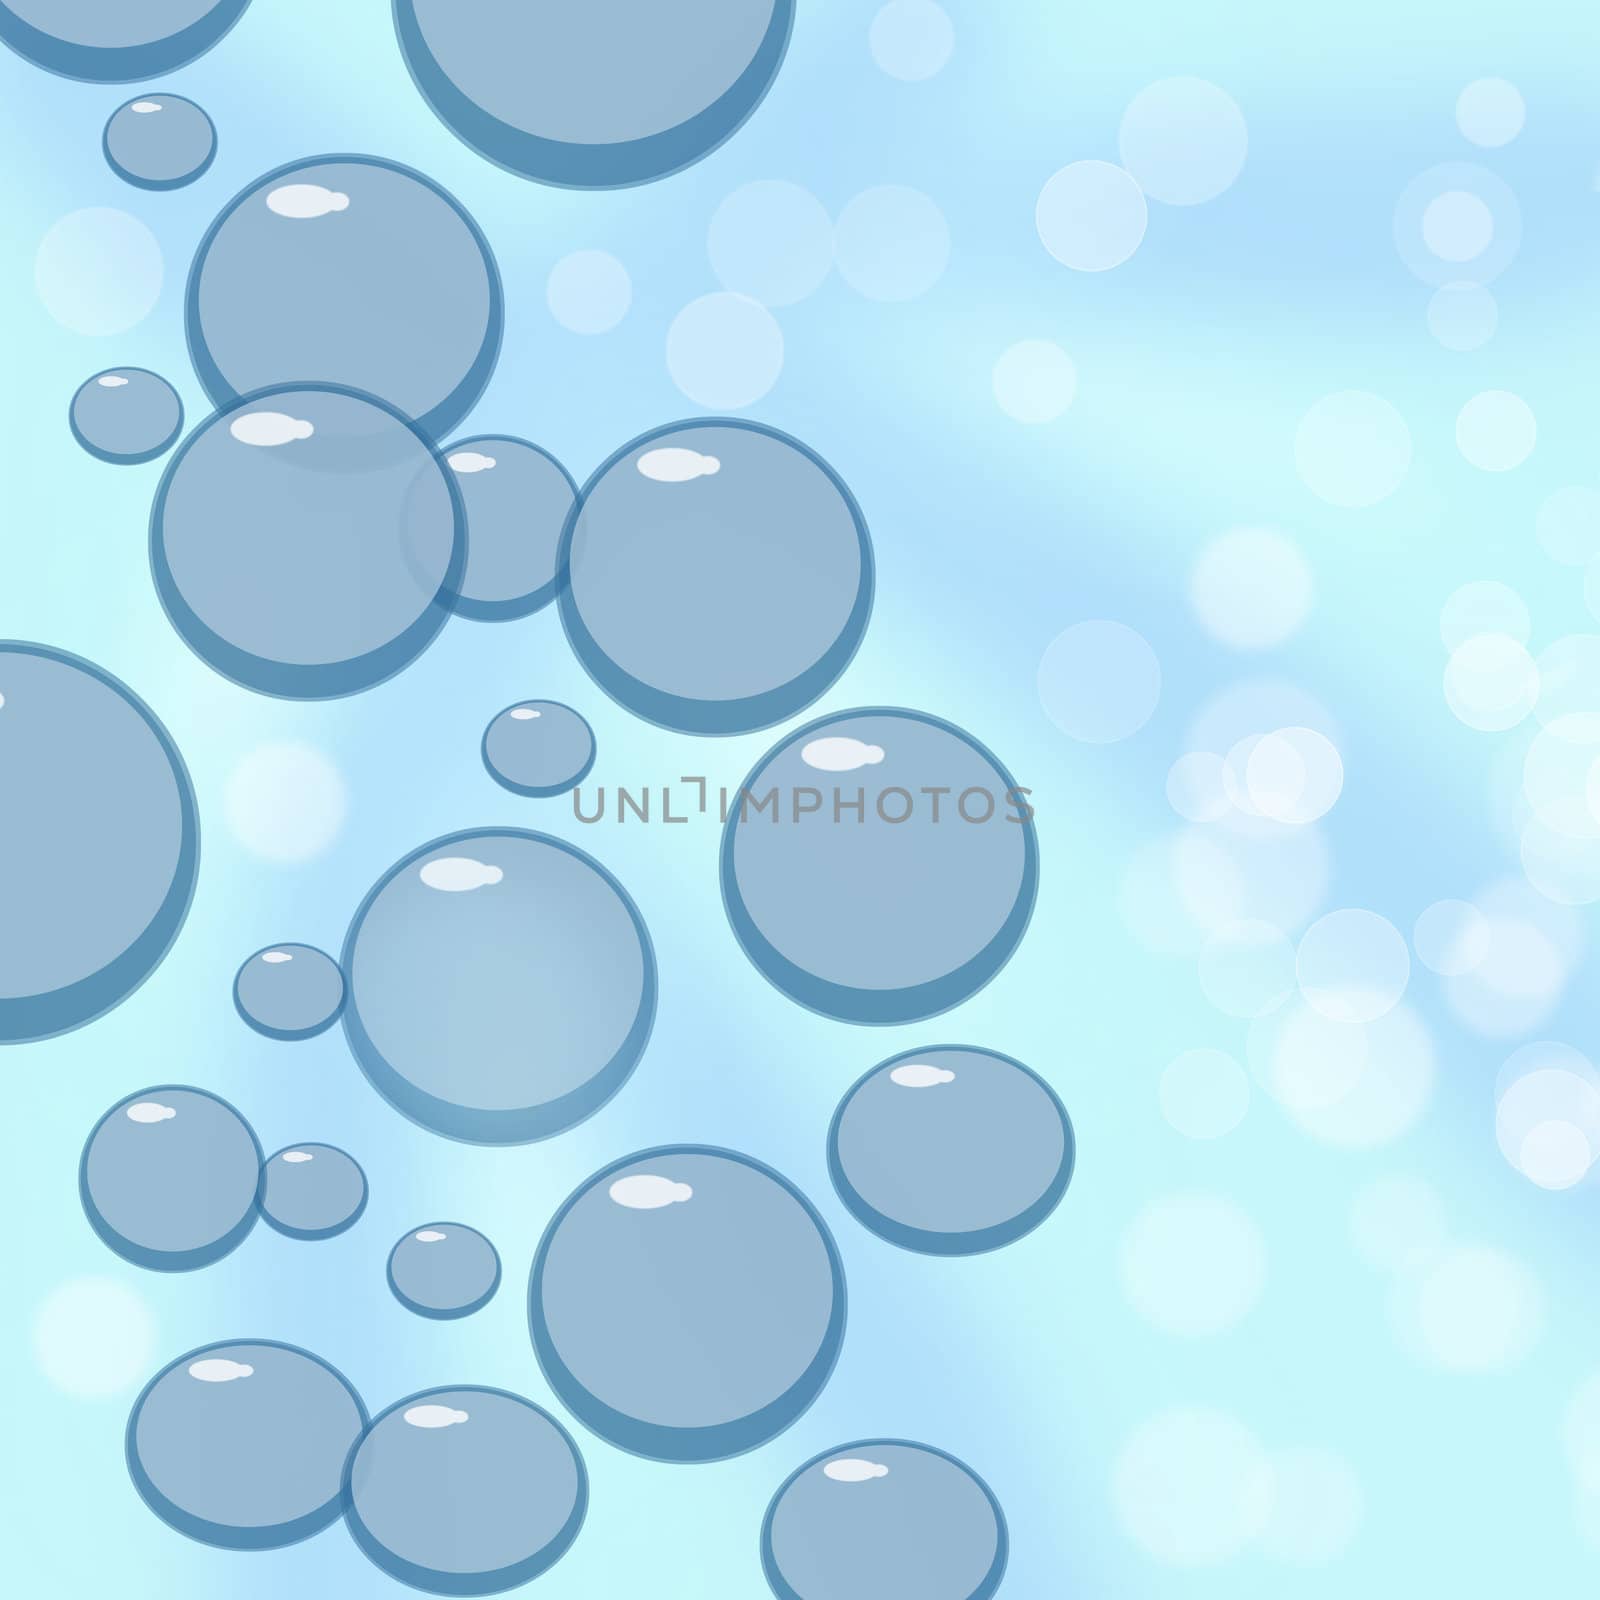 Rising bubbles: blue bubbles on a light blue background with bokeh